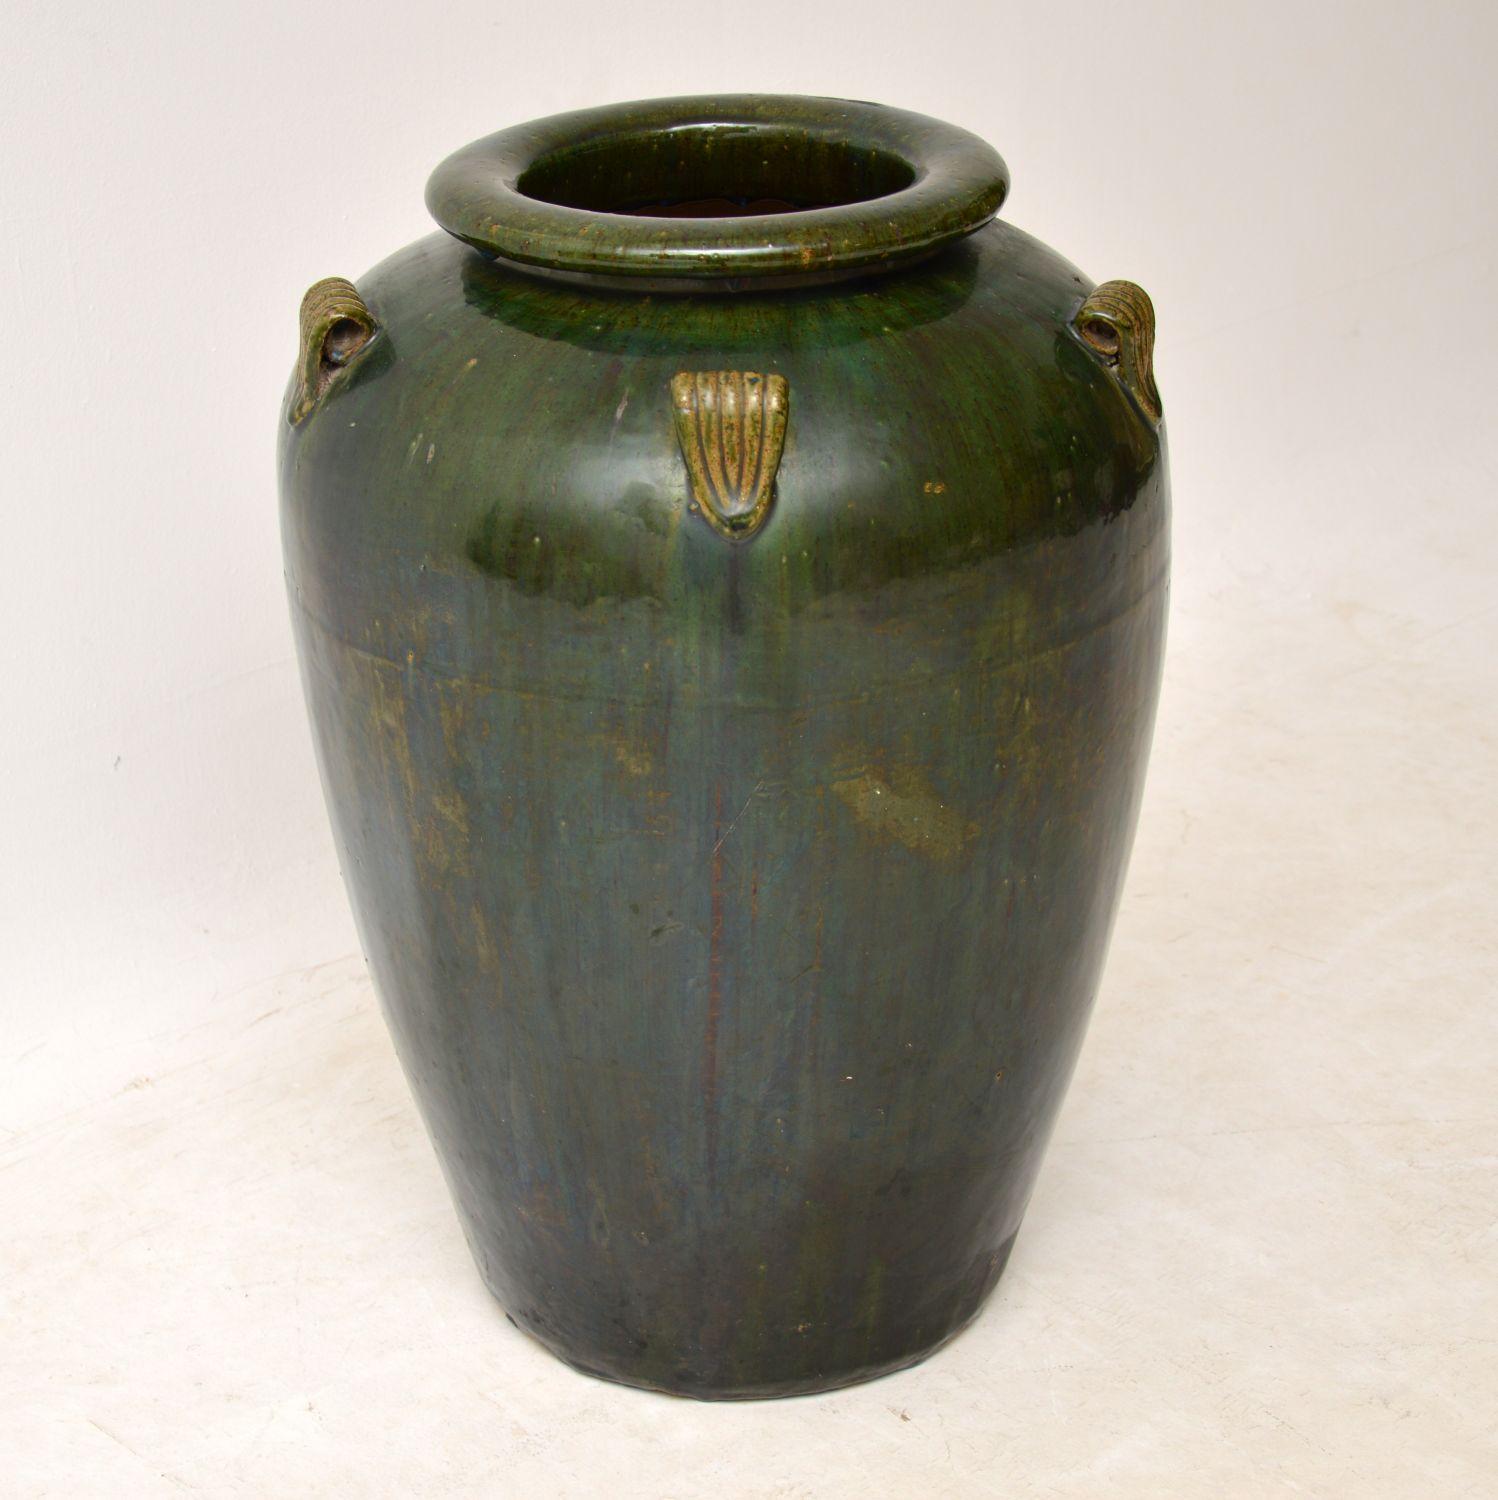 A stunning and very large vintage earthenware vase, this dates from circa 1960s. It’s hard to get a sense of the scale in the photos, but this is very big and heavy! It is beautifully made and is in excellent condition, with hardly any wear to be